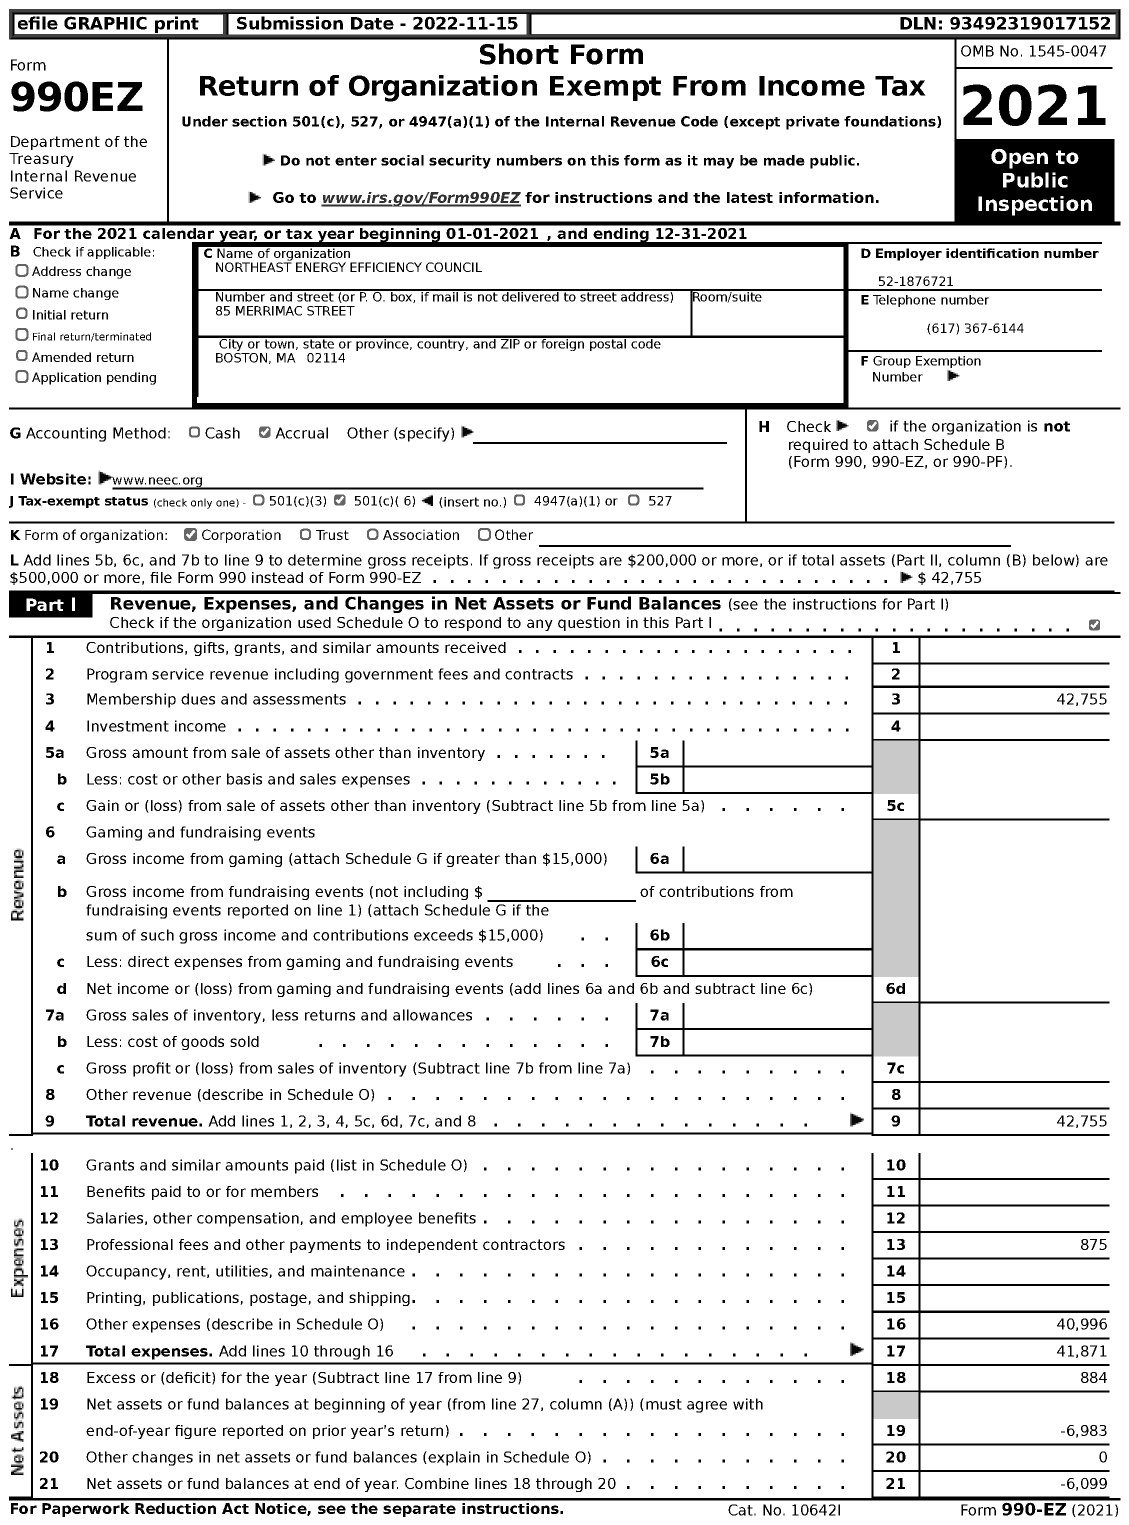 Image of first page of 2021 Form 990EZ for Northeast Energy Efficiency Council